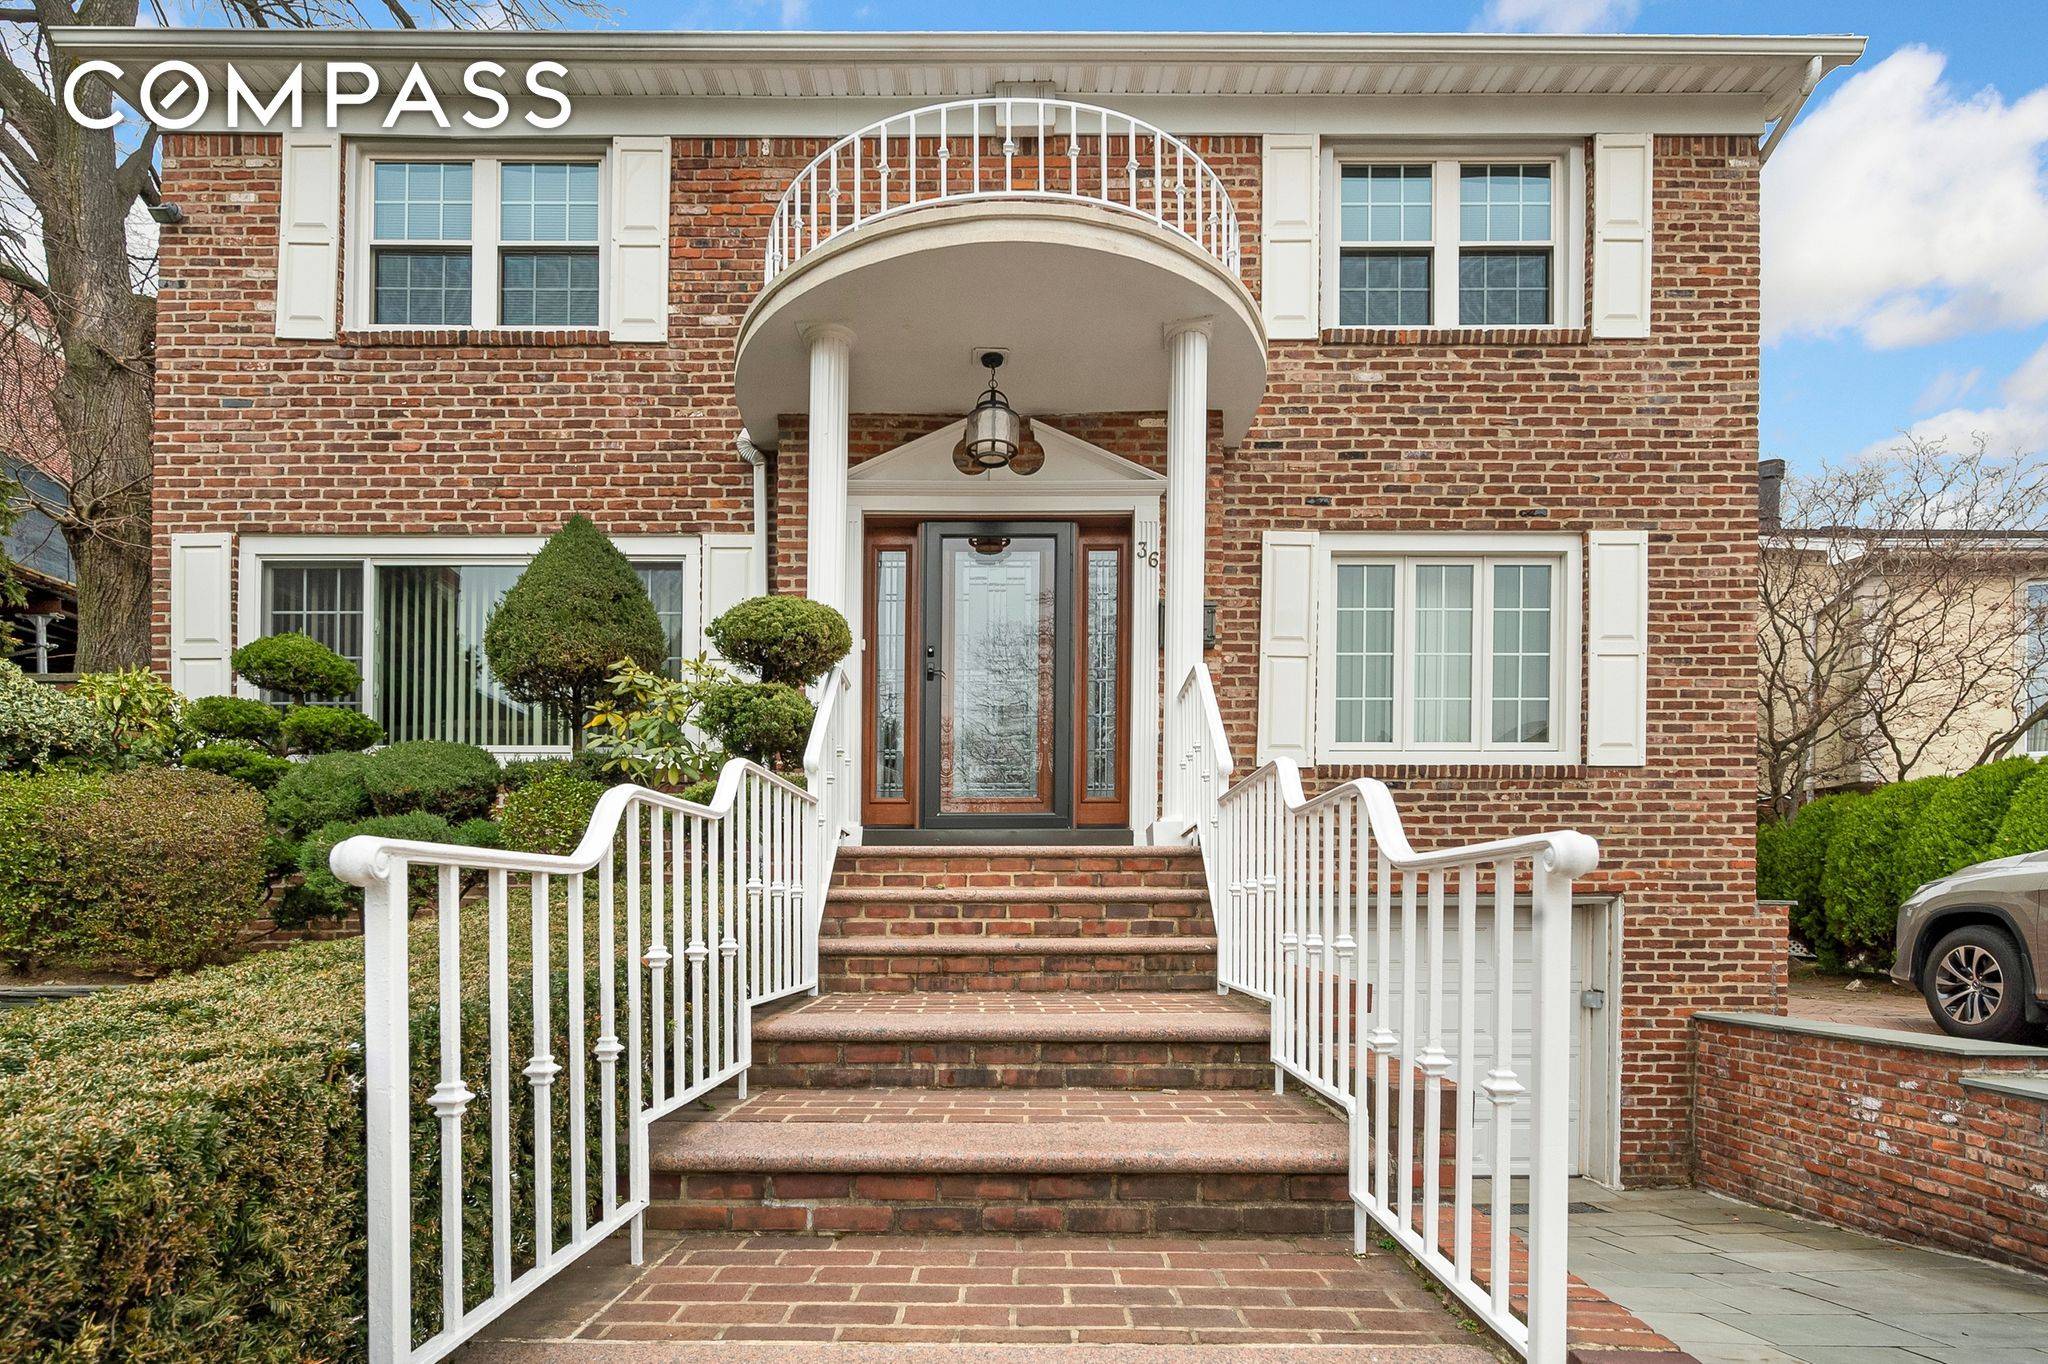 Welcome home to 36 Shore Road Lane in Prime Bay Ridge, Brooklyn.